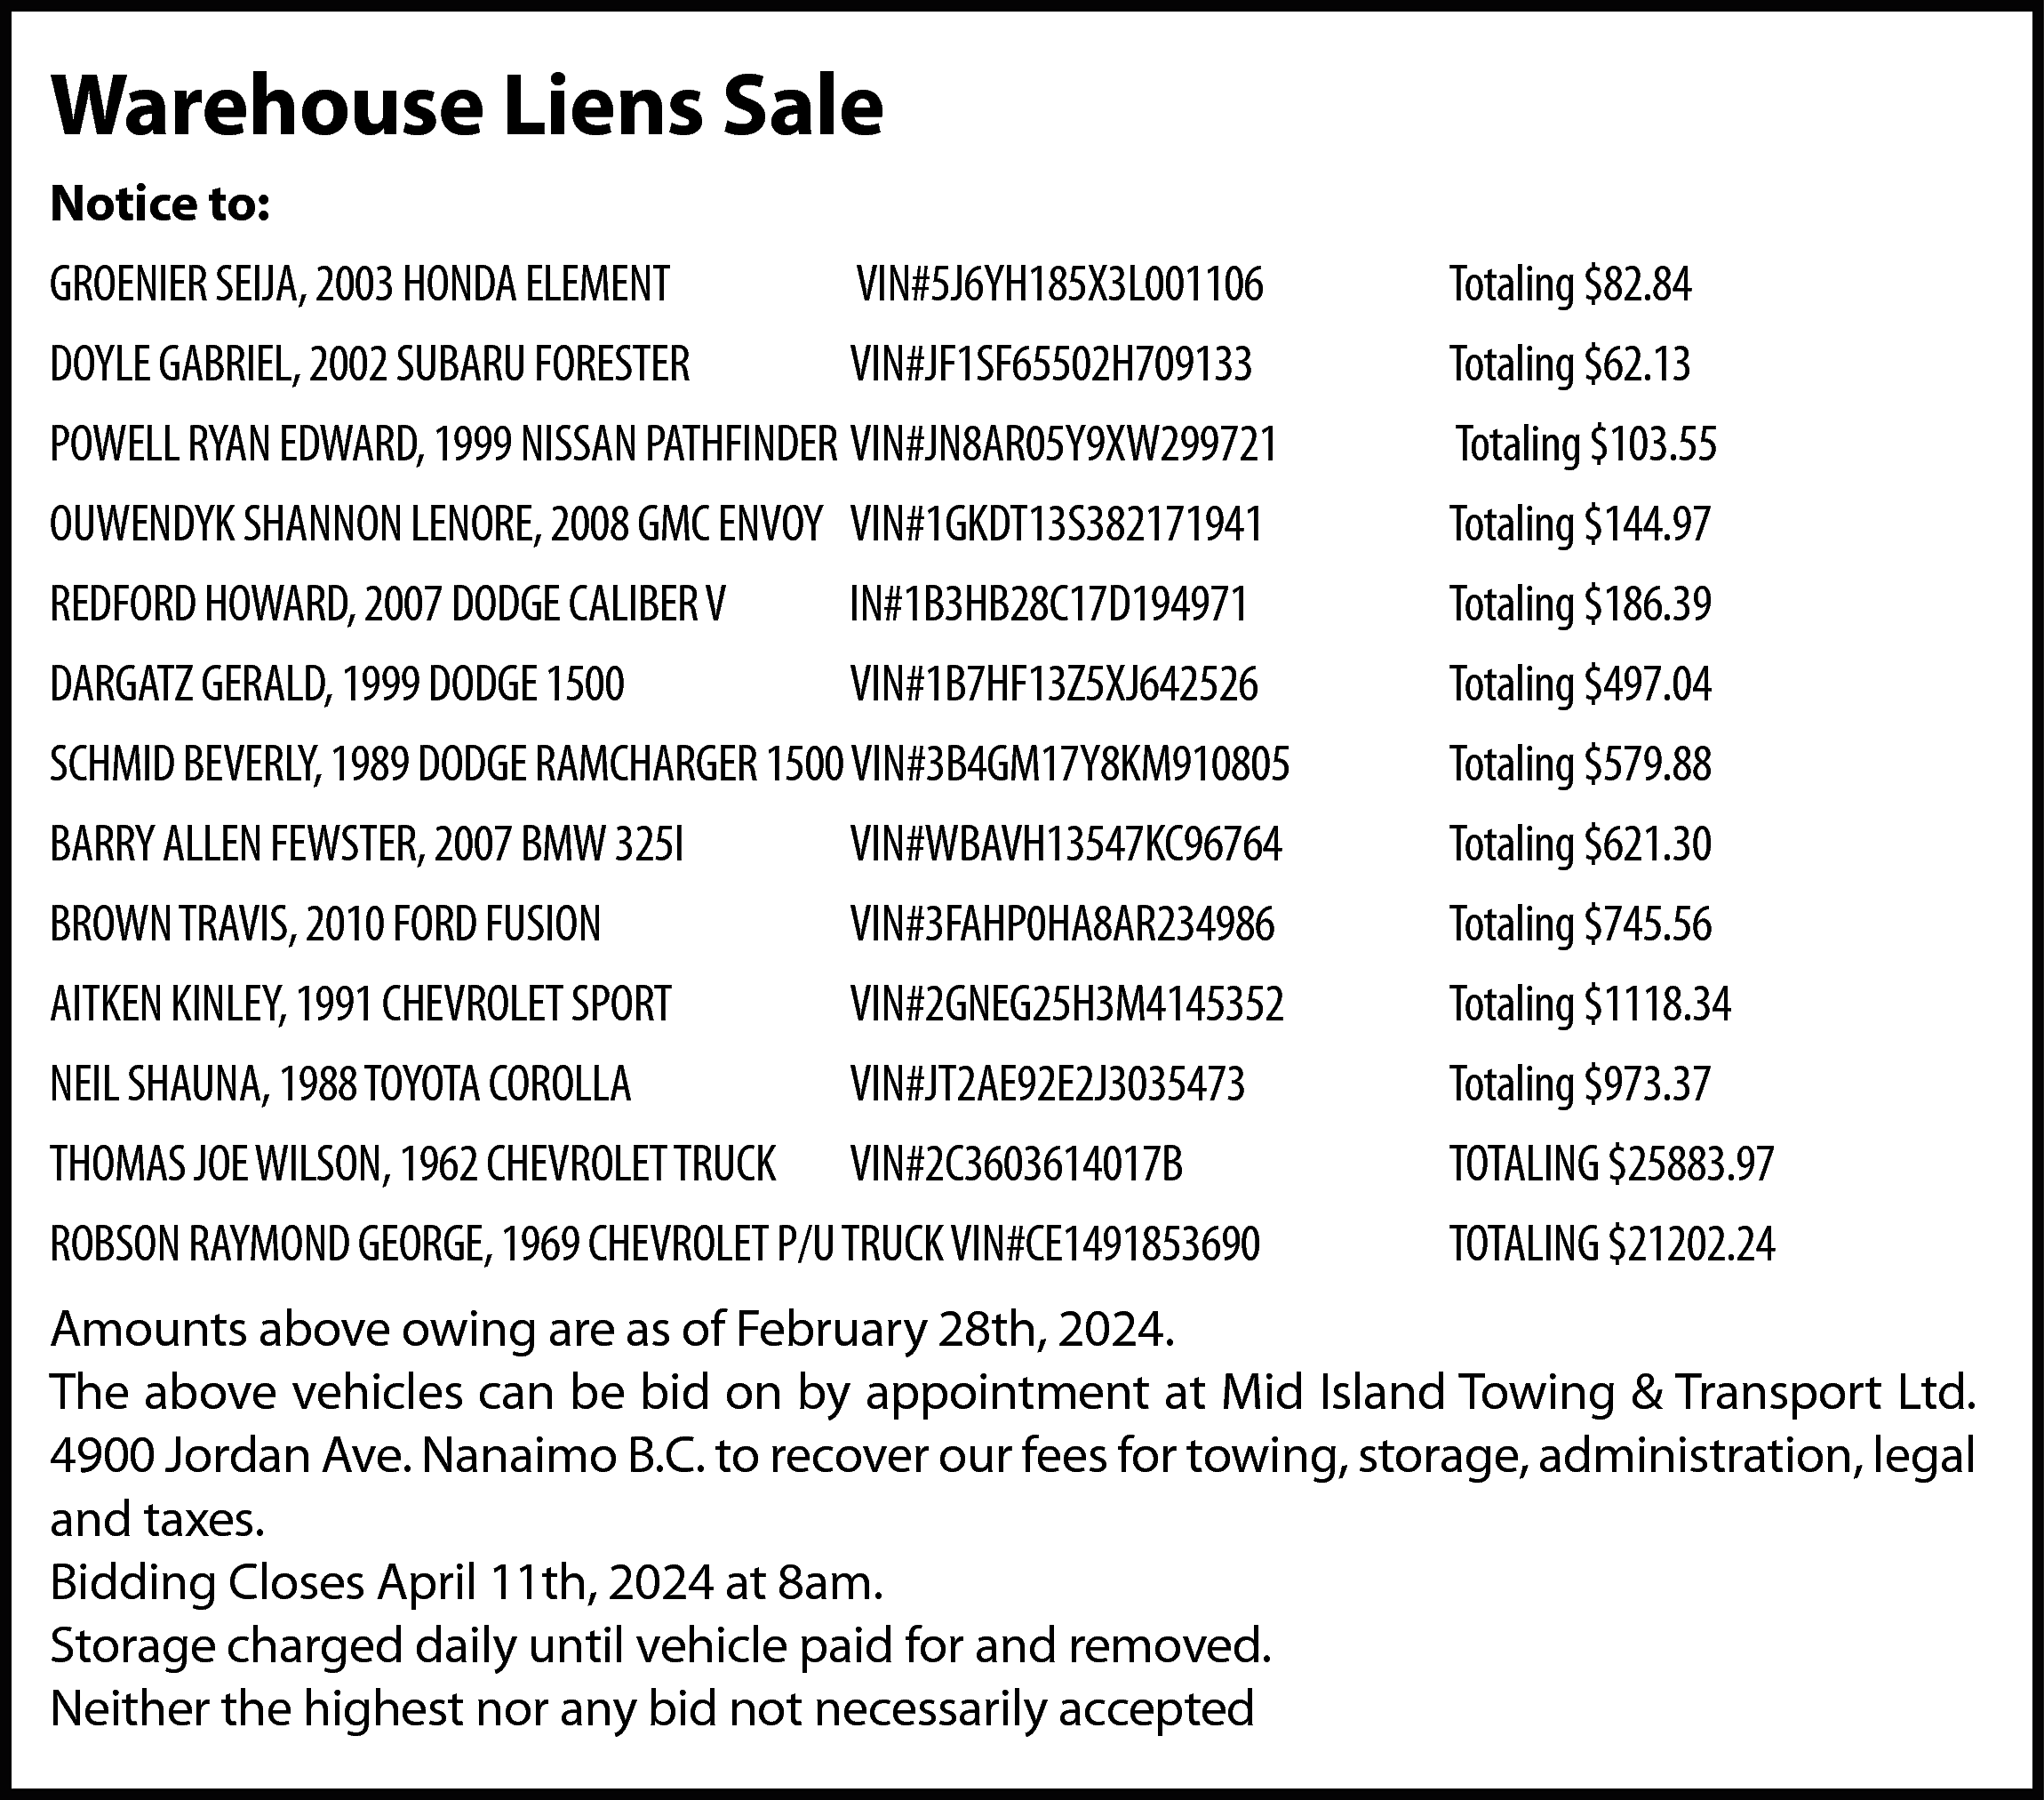 Warehouse Liens Sale <br>Notice to:  Warehouse Liens Sale  Notice to:  GROENIER SEIJA, 2003 HONDA ELEMENT    VIN#5J6YH185X3L001106    Totaling $82.84    DOYLE GABRIEL, 2002 SUBARU FORESTER    VIN#JF1SF65502H709133    Totaling $62.13    POWELL RYAN EDWARD, 1999 NISSAN PATHFINDER VIN#JN8AR05Y9XW299721    Totaling $103.55    OUWENDYK SHANNON LENORE, 2008 GMC ENVOY VIN#1GKDT13S382171941    Totaling $144.97    REDFORD HOWARD, 2007 DODGE CALIBER V    IN#1B3HB28C17D194971    Totaling $186.39    DARGATZ GERALD, 1999 DODGE 1500    VIN#1B7HF13Z5XJ642526    Totaling $497.04    SCHMID BEVERLY, 1989 DODGE RAMCHARGER 1500 VIN#3B4GM17Y8KM910805    Totaling $579.88    BARRY ALLEN FEWSTER, 2007 BMW 325I    VIN#WBAVH13547KC96764    Totaling $621.30    BROWN TRAVIS, 2010 FORD FUSION    VIN#3FAHP0HA8AR234986    Totaling $745.56    AITKEN KINLEY, 1991 CHEVROLET SPORT    VIN#2GNEG25H3M4145352    Totaling $1118.34    NEIL SHAUNA, 1988 TOYOTA COROLLA    VIN#JT2AE92E2J3035473    Totaling $973.37    THOMAS JOE WILSON, 1962 CHEVROLET TRUCK    VIN#2C3603614017B    TOTALING $25883.97    ROBSON RAYMOND GEORGE, 1969 CHEVROLET P/U TRUCK VIN#CE1491853690    TOTALING $21202.24    Amounts above owing are as of February 28th, 2024.  The above vehicles can be bid on by appointment at Mid Island Towing & Transport Ltd.  4900 Jordan Ave. Nanaimo B.C. to recover our fees for towing, storage, administration, legal  and taxes.  Bidding Closes April 11th, 2024 at 8am.  Storage charged daily until vehicle paid for and removed.  Neither the highest nor any bid not necessarily accepted    